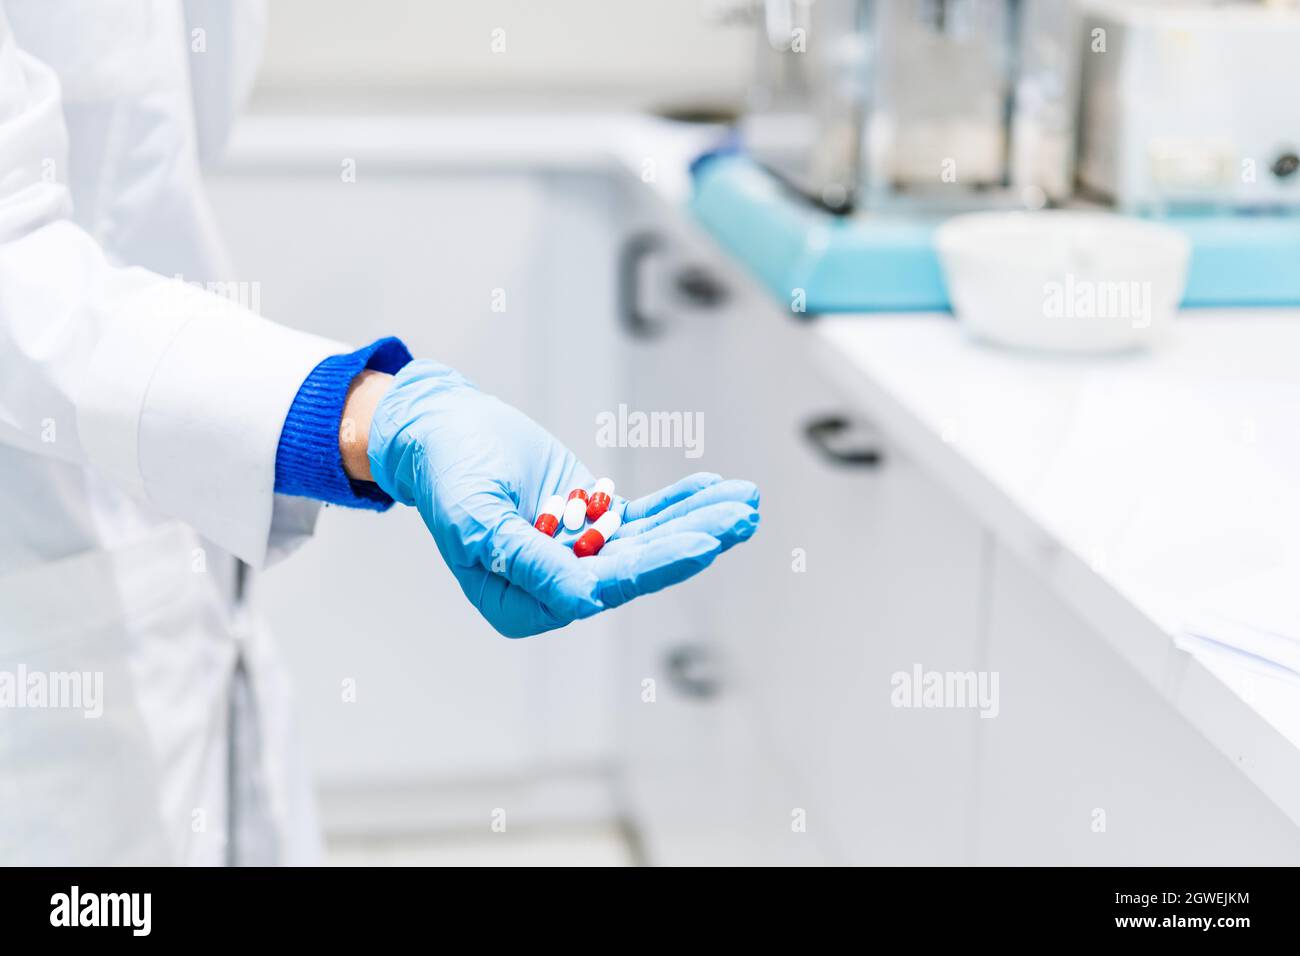 Midsection Of Scientist Holding Capsules At Laboratory Stock Photo